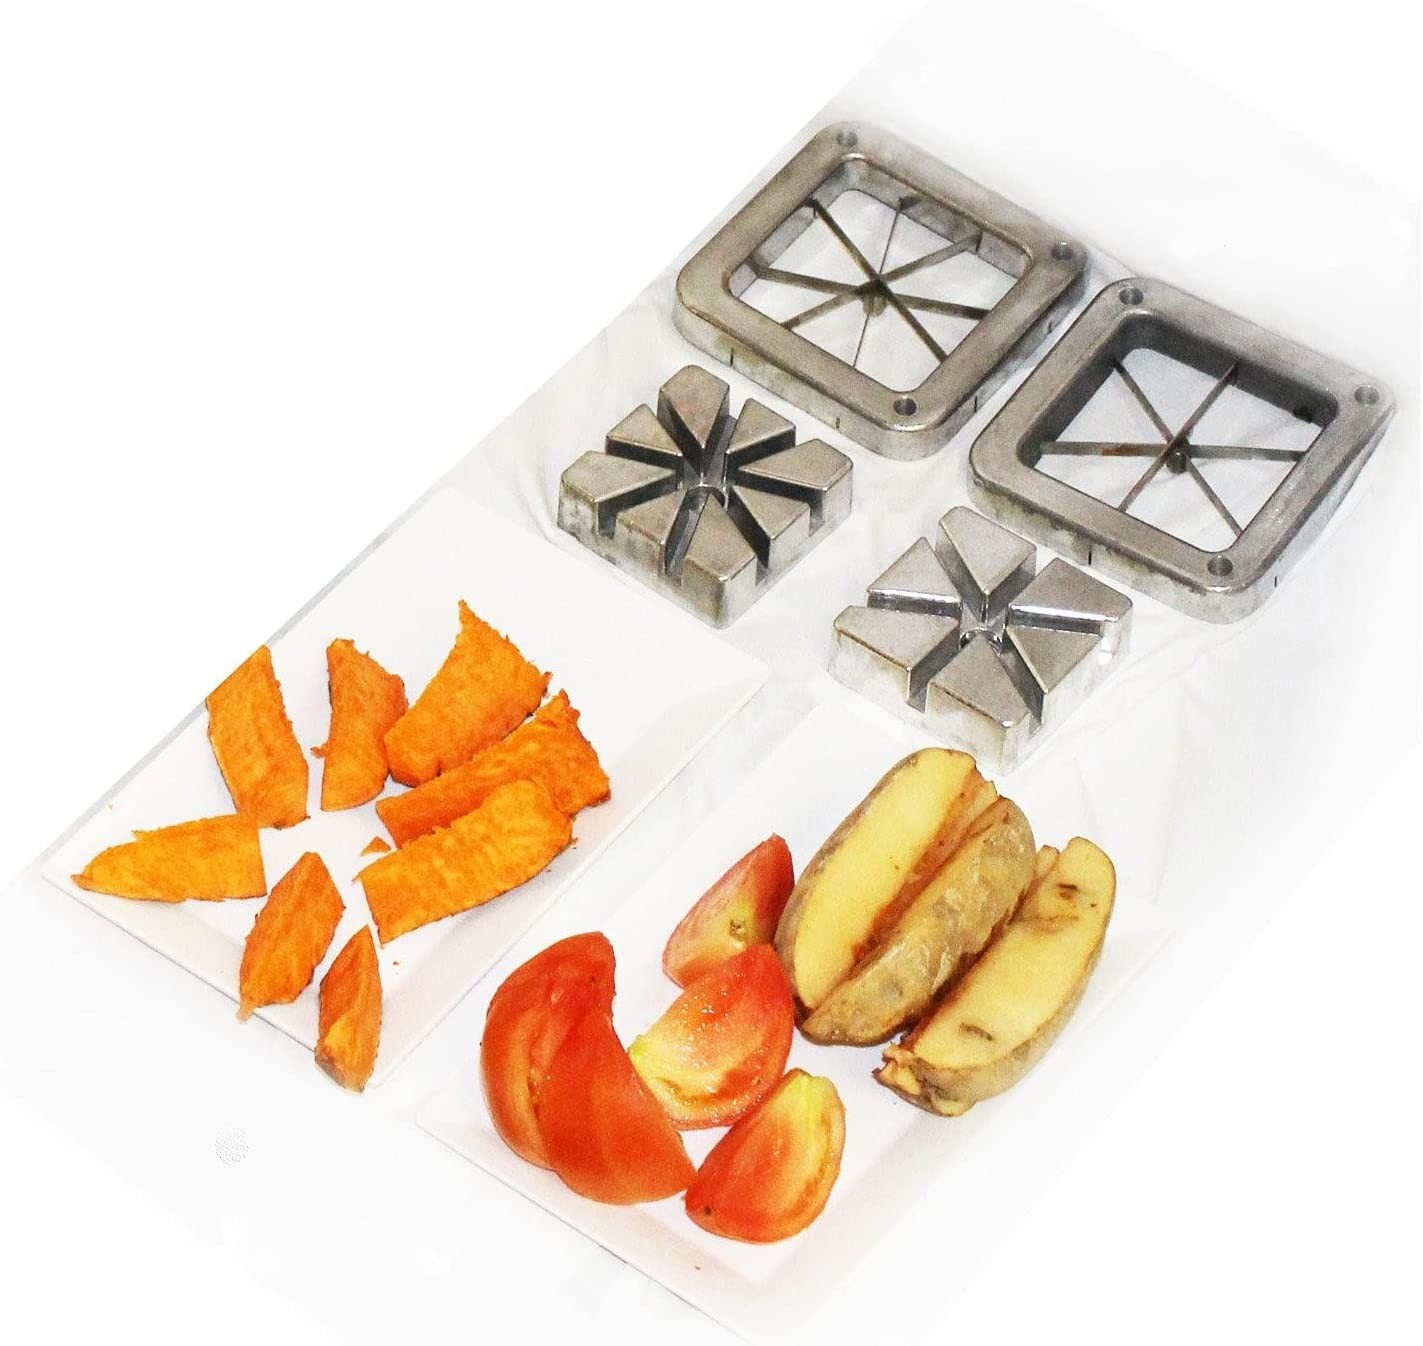 https://www.lionsdeal.com/itempics/TigerChef-Commercial-Grade-French-Fry-Cutter-Replacement-6---8-Wedge-Blades-Set---4-pcs-52689_xlarge.jpg